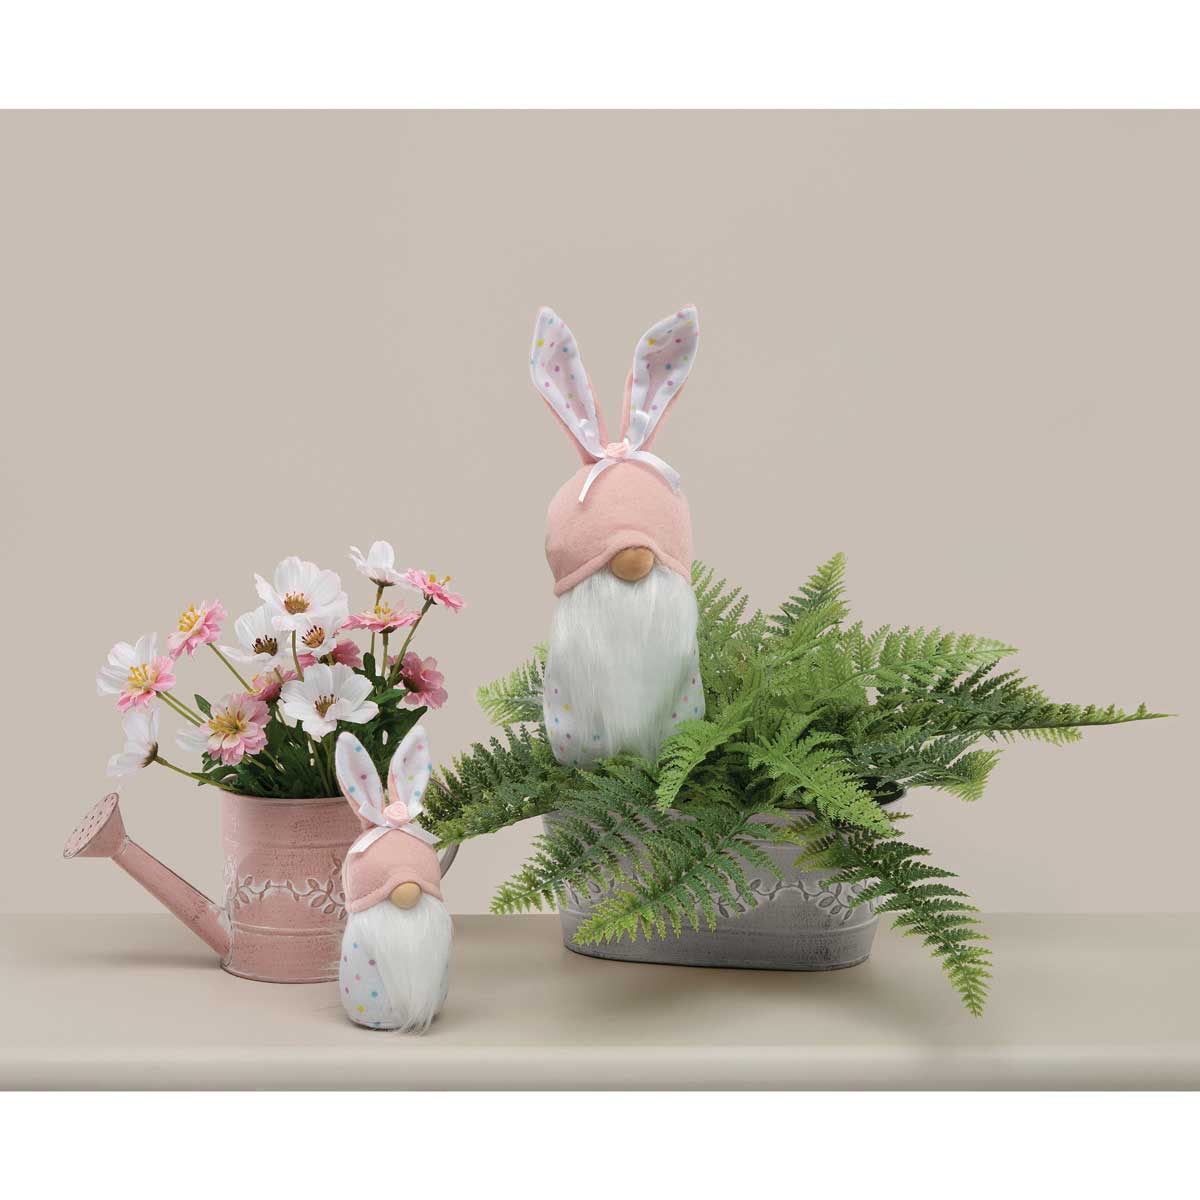 b70 GNOME PINDOT BUNNY LARGE 3.75IN X 6IN X 11.5IN WHITE/PINK